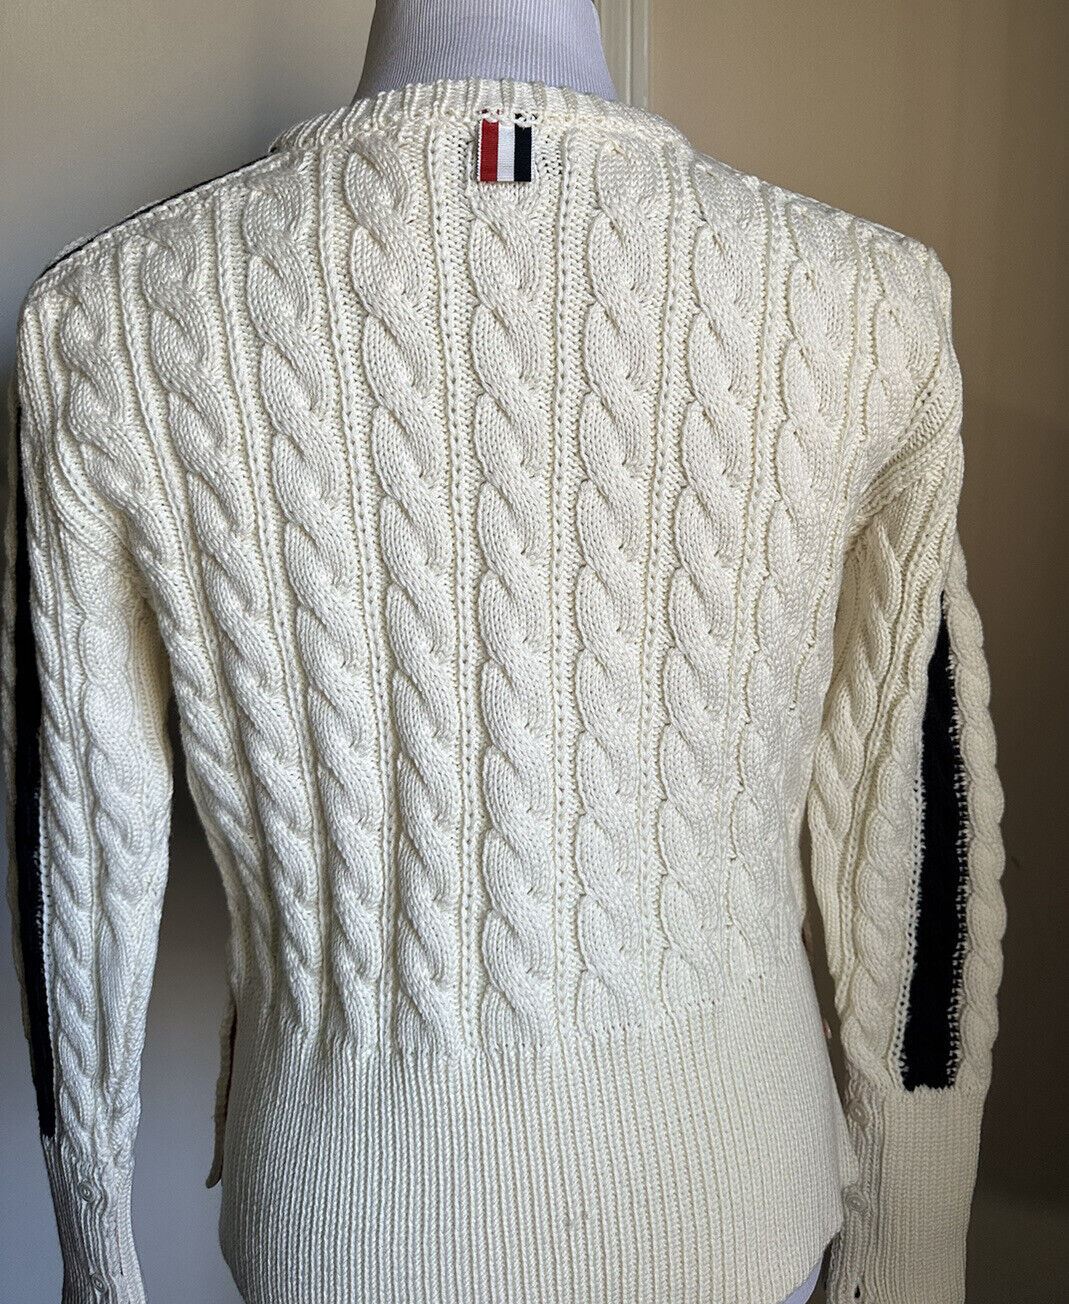 NWT Thom Browne Men Cable Knit Merino Wool Sweater White Size S ( 1 ) Ireland